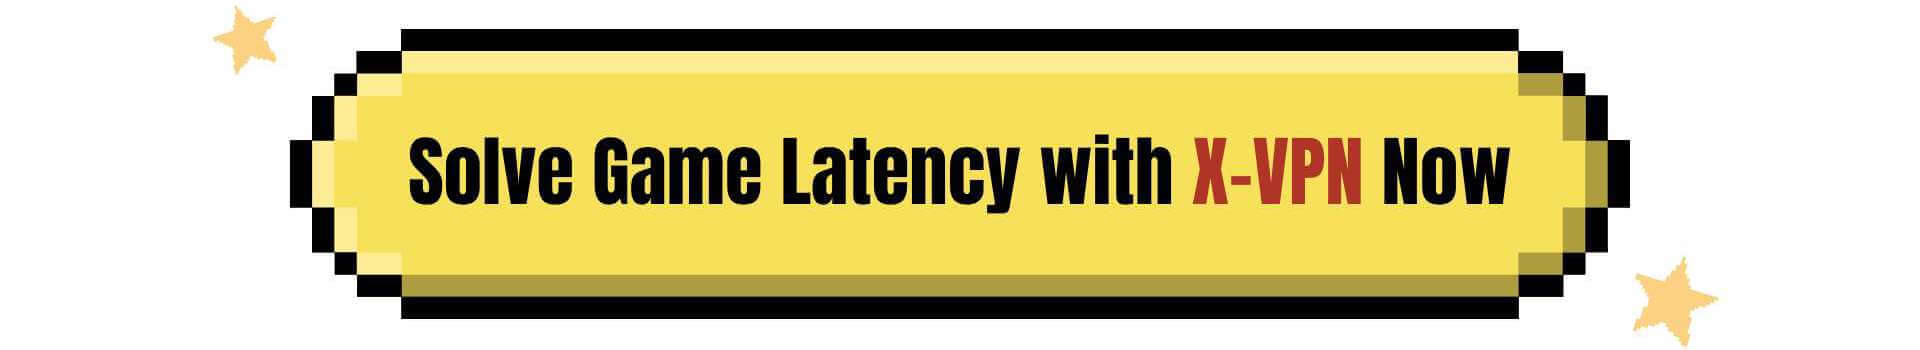 Solve Game Latency with X-VPN Now